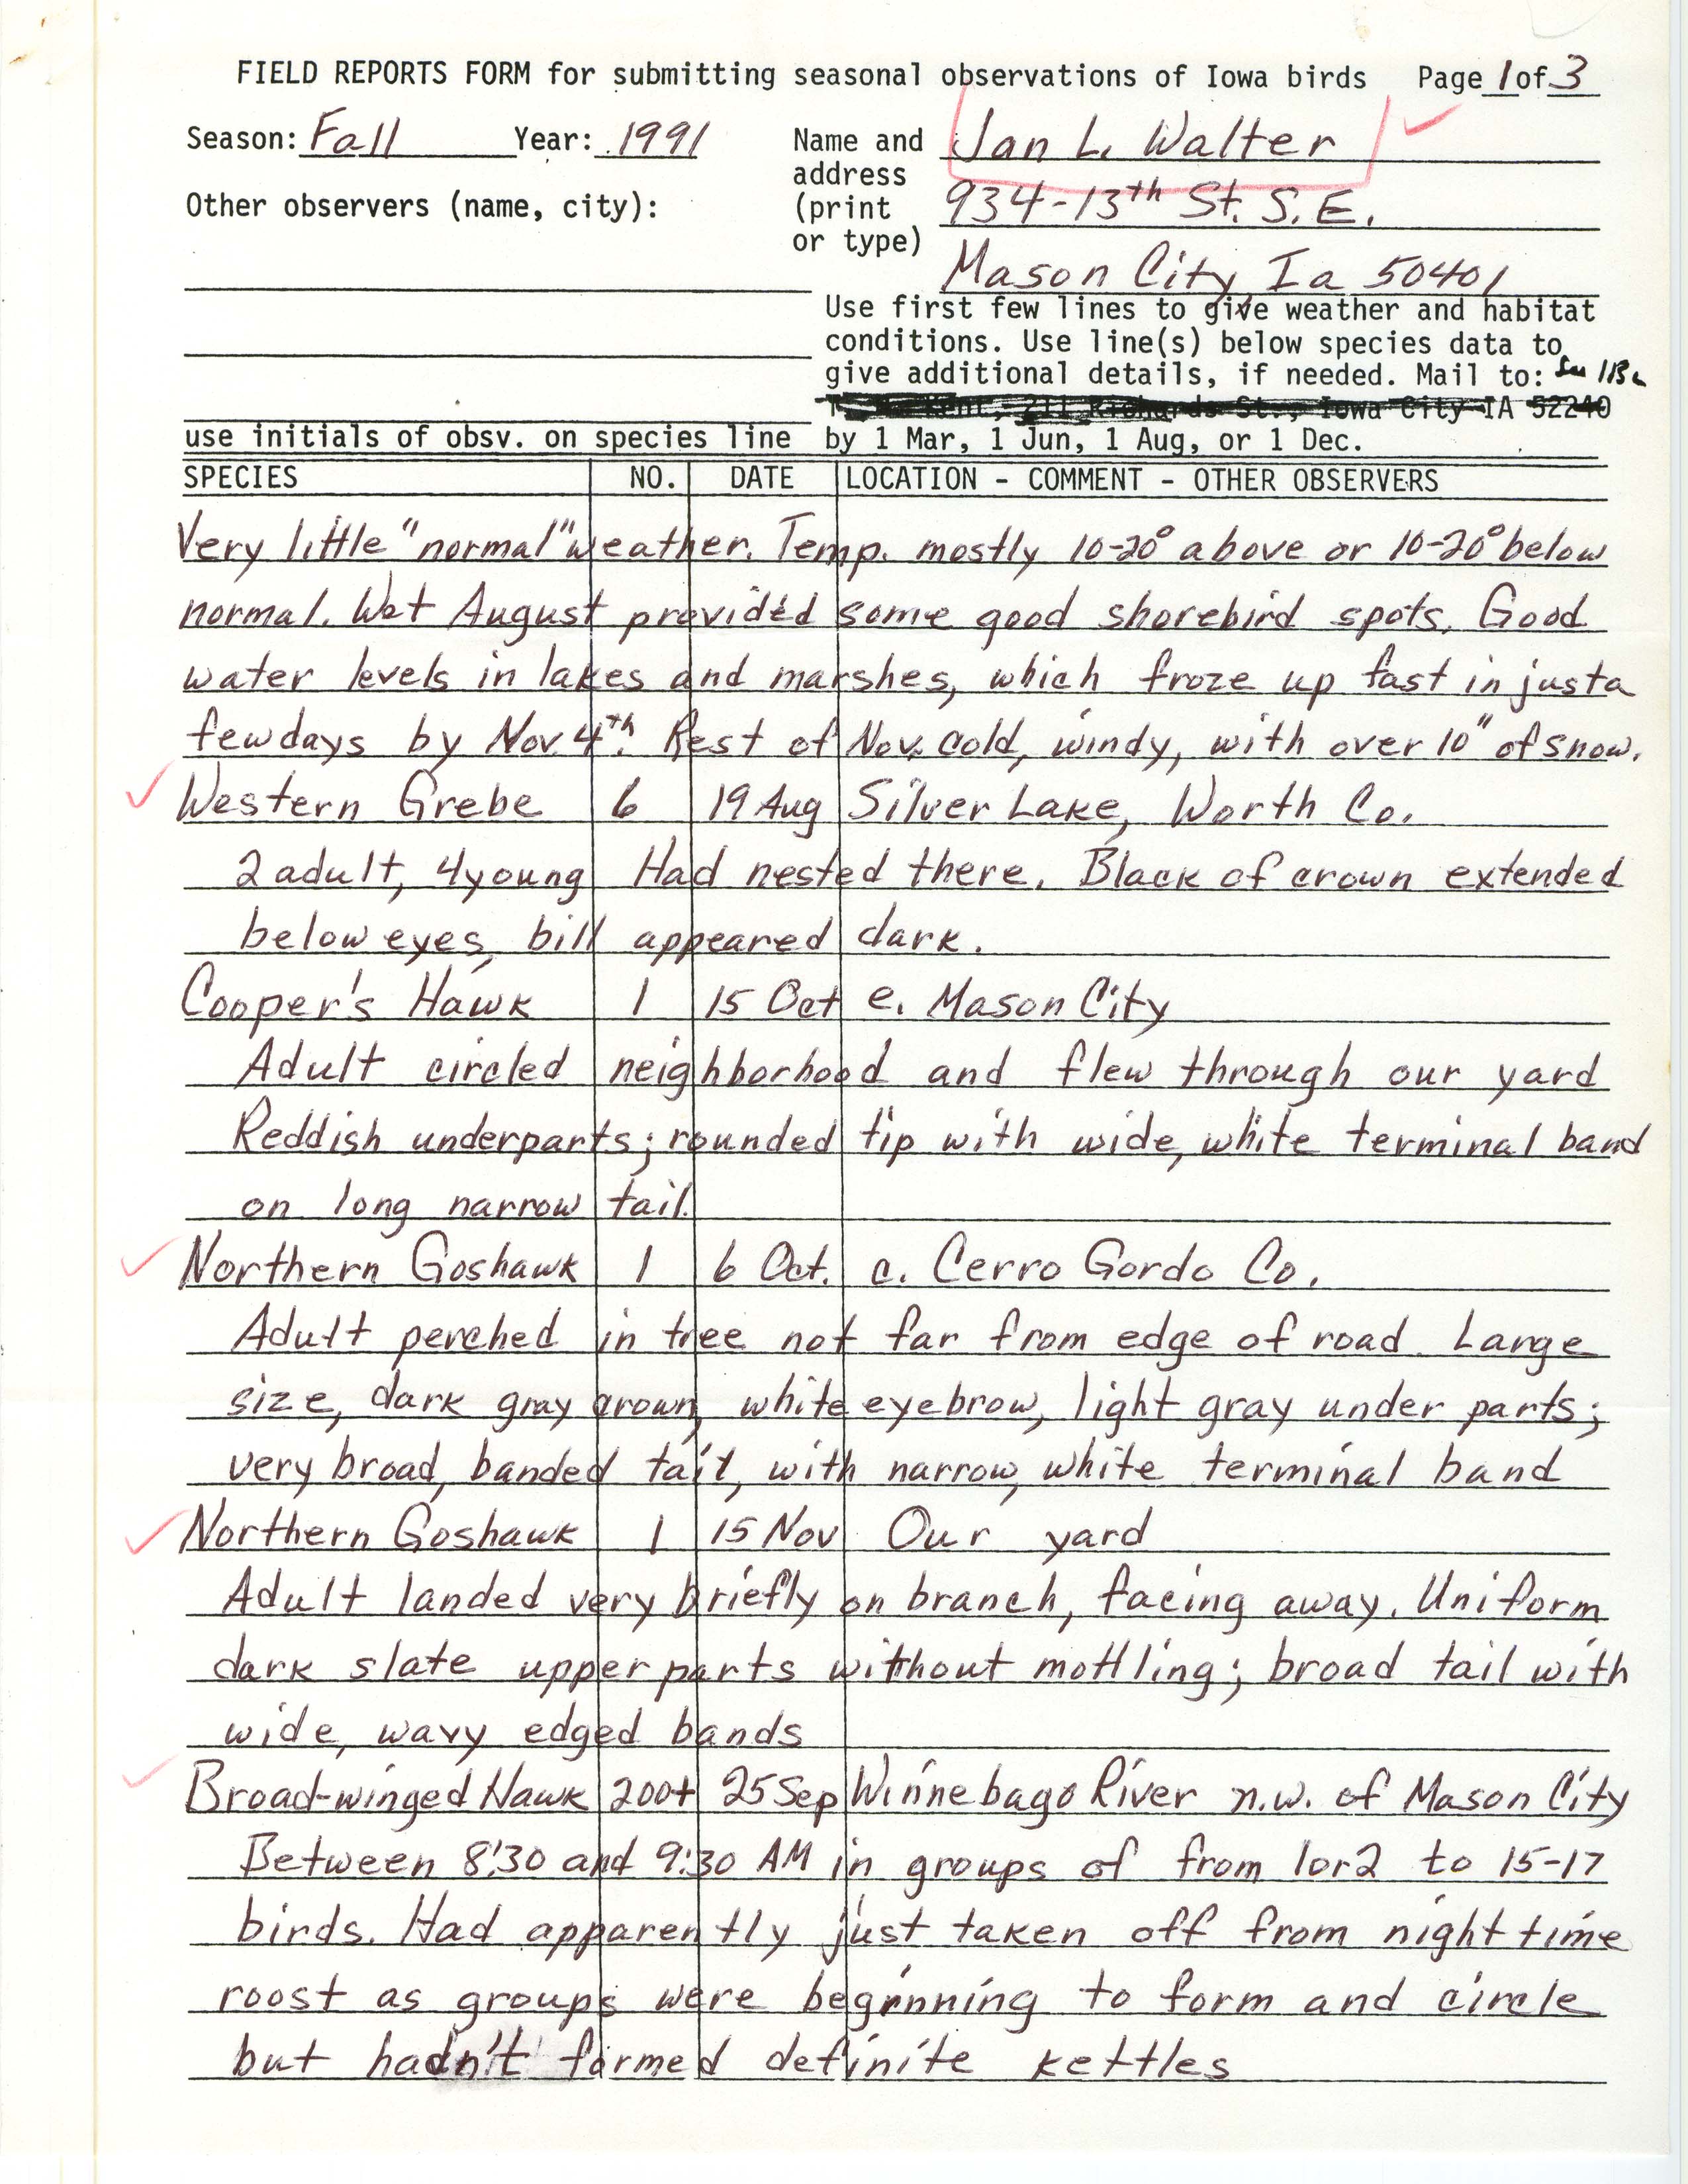 Field reports form for submitting seasonal observations of Iowa birds, Jan L. Walter, fall 1991